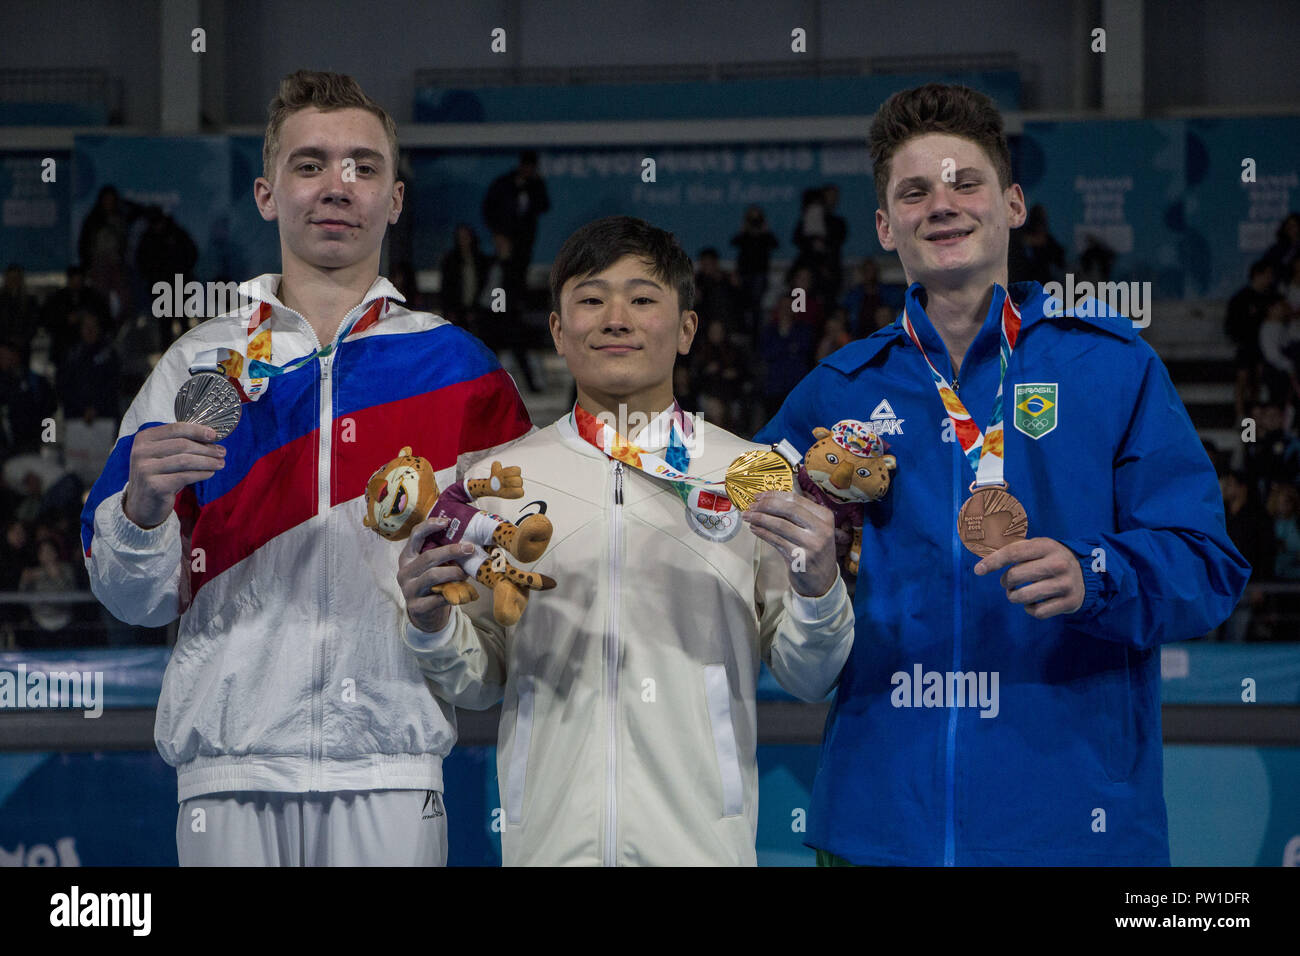 Buenos Aires, Buenos Aires, Argentina. 11th Oct, 2018. Final Award of Artistic Gymnastics Male Multiple Competition in the Youth Olympic Games Buenos Aires 2018. Gold Medal for Kitazono Takeru of Japan, Silver Medal for Naidin Sergei of Russia and Bronze Medal for Soares Diogo of Brazil. Credit: Roberto Almeida Aveledo/ZUMA Wire/Alamy Live News Stock Photo